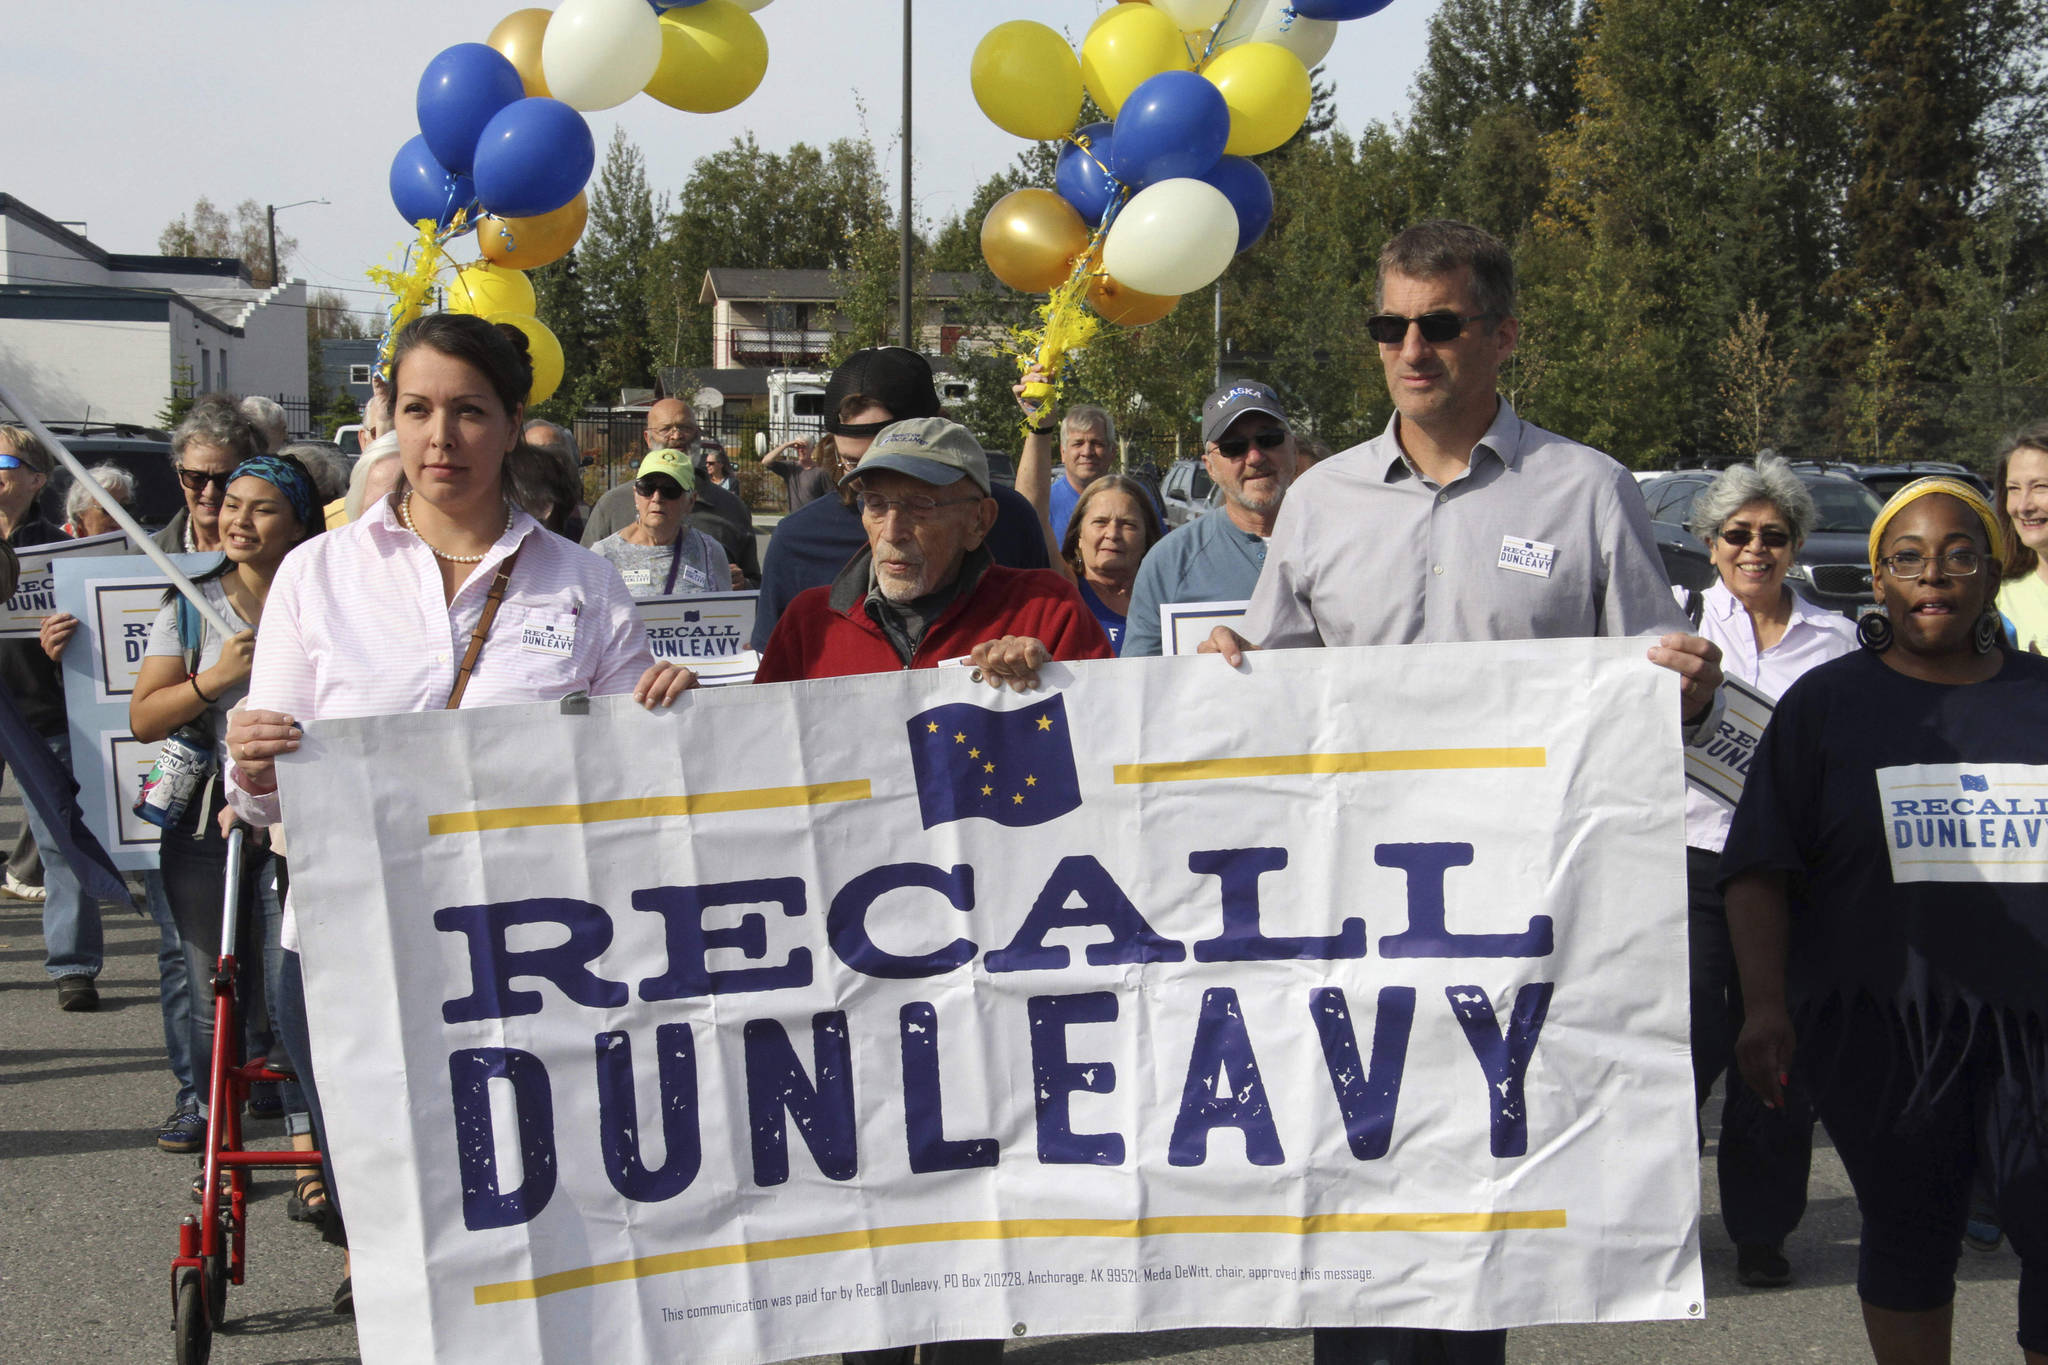 In this Sept. 5, 2019, file photo, Meda DeWitt, left, Vic Fischer, middle, and Aaron Welterlen, leaders of an effort to recall Alaska Gov. Mike Dunleavy, lead about 50 volunteers in a march to the Alaska Division of Elections office in Anchorage, Alaska. The Alaska Supreme Court on Friday, Feb. 14, 2020 agreed to allow a group seeking to recall Gov. Mike Dunleavy to begin a second signature-gathering phase. (AP Photo/Mark Thiessen, File)